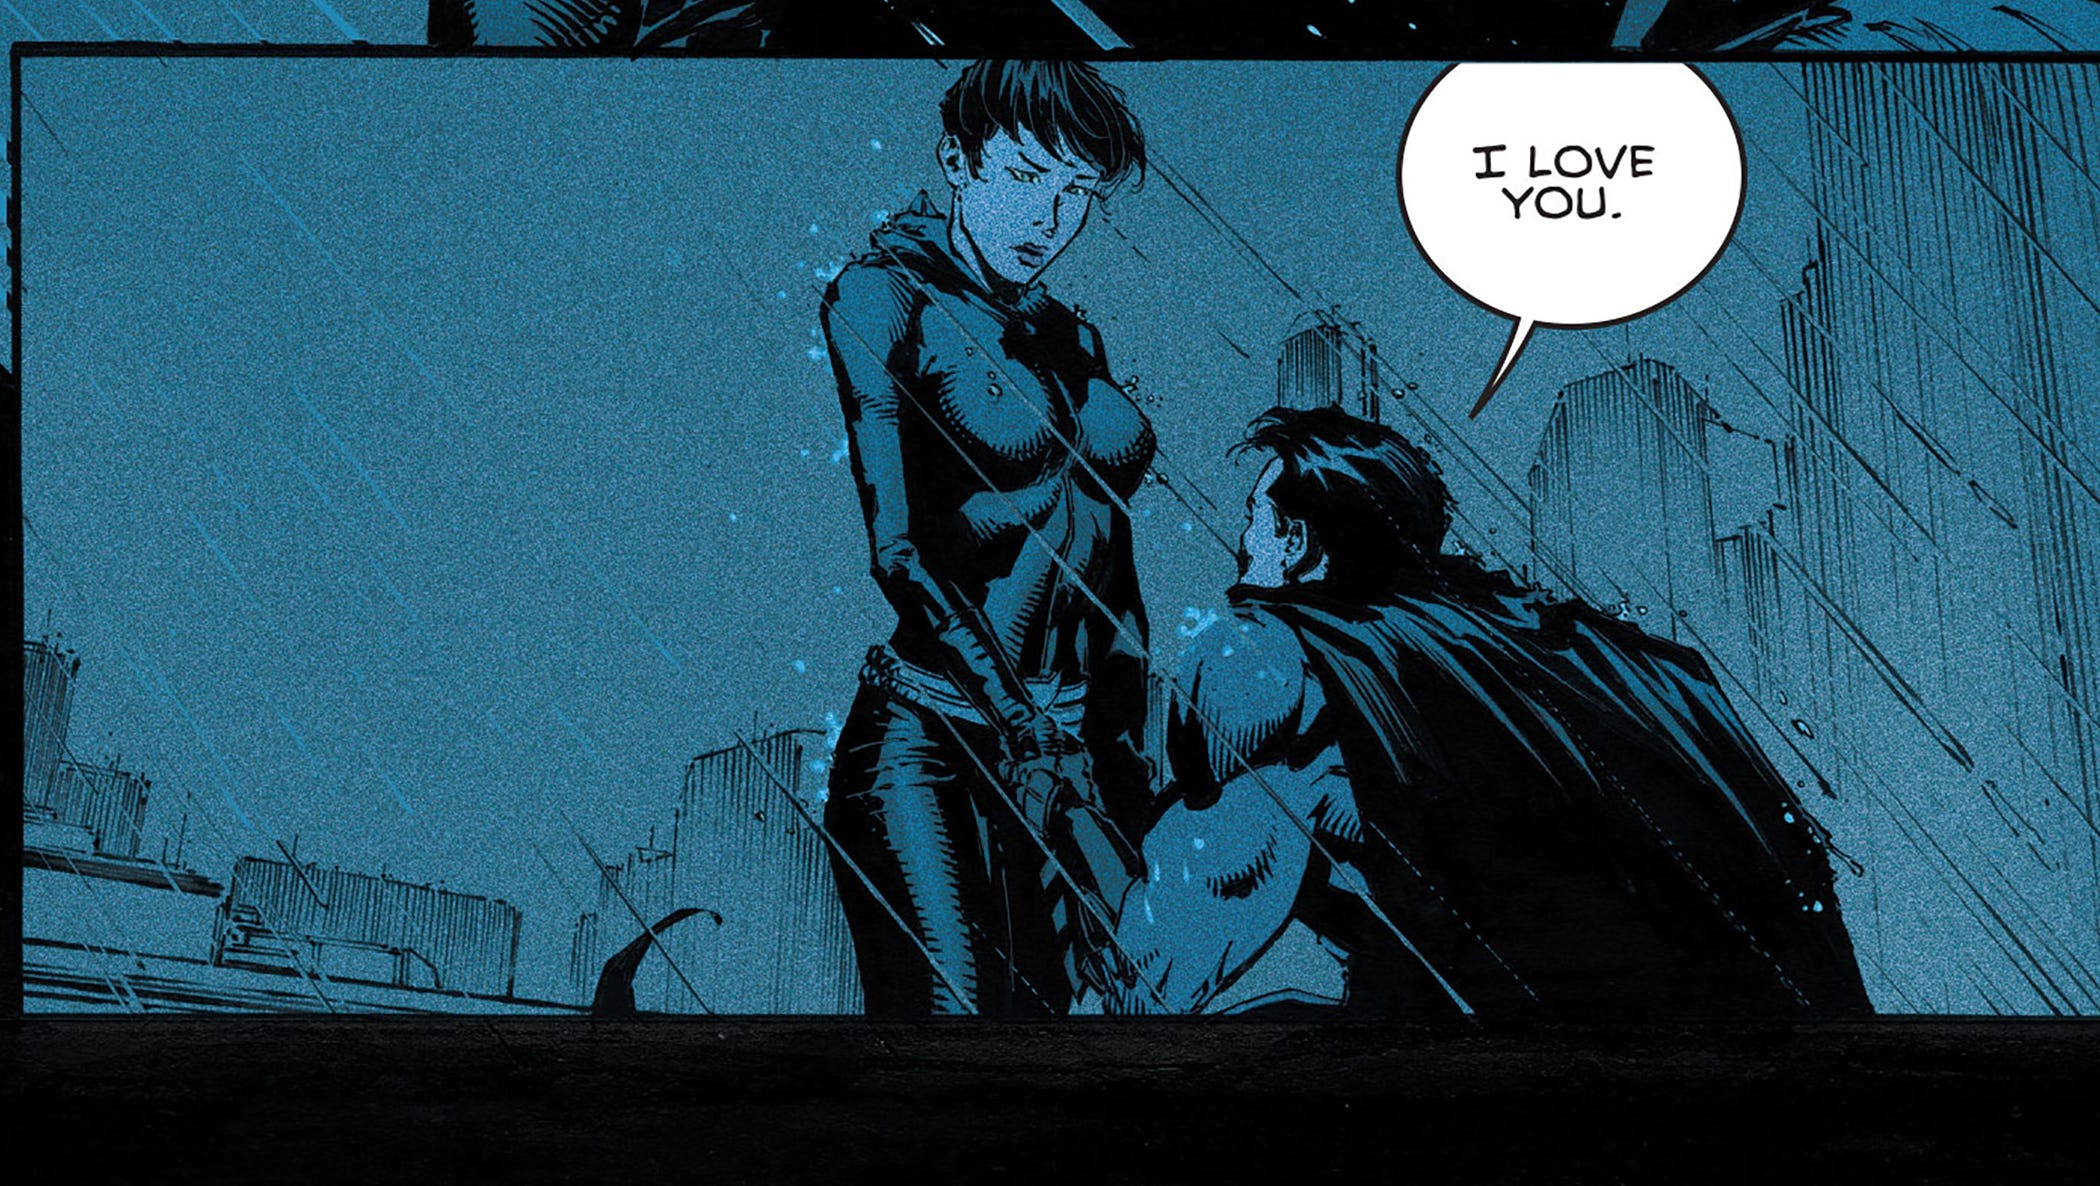 Batman asks Catwoman to marry him in new comic (exclusive)